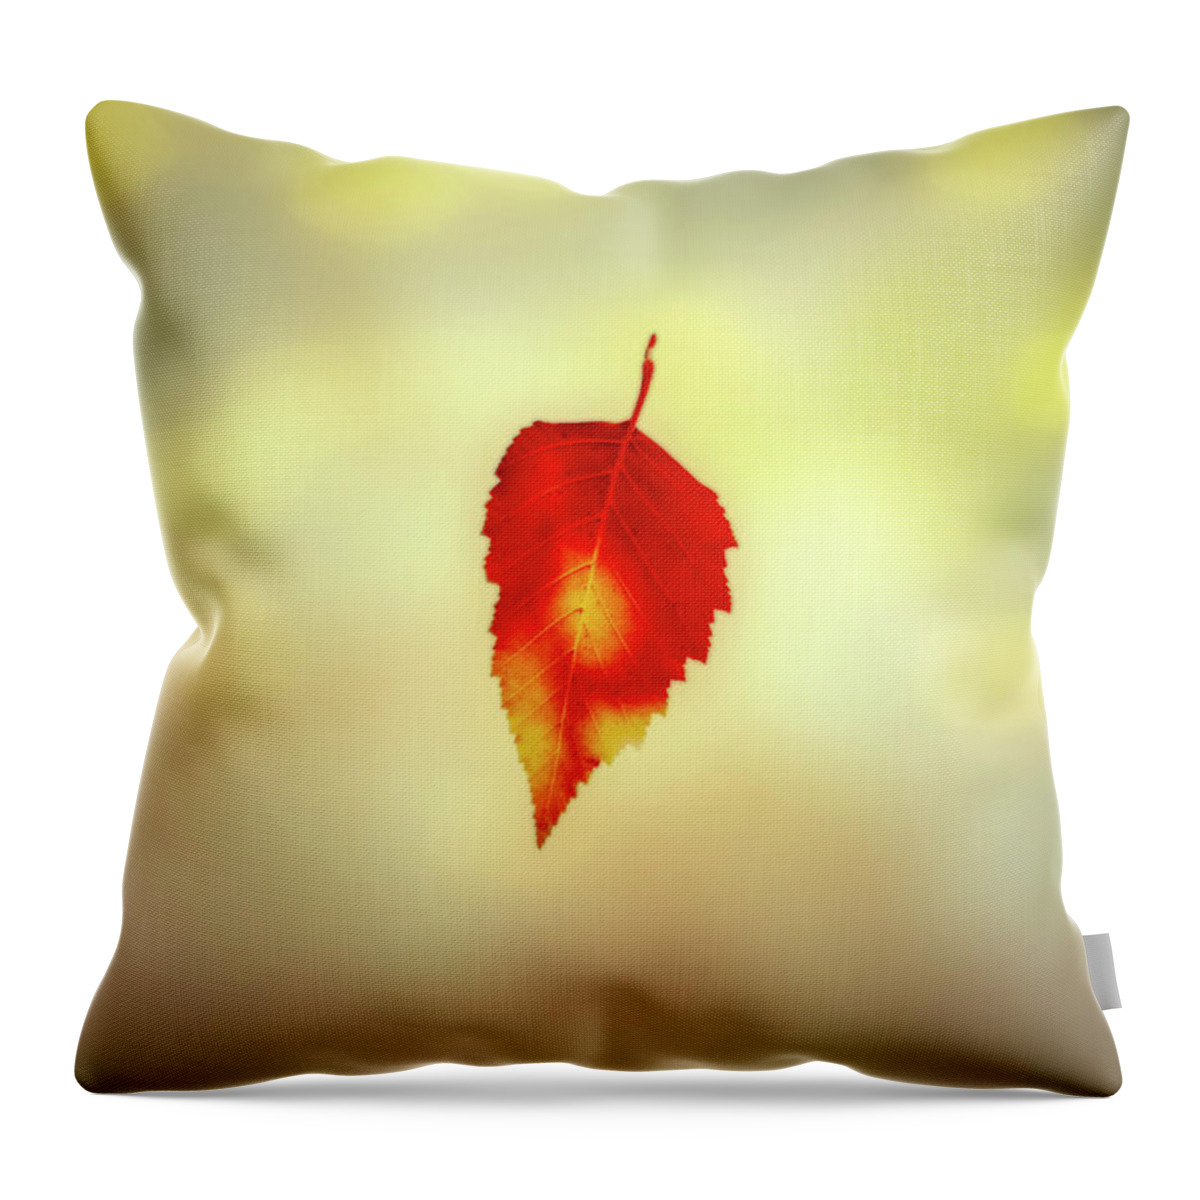 Leaves Throw Pillow featuring the photograph Autumn Leaf by Bob Orsillo